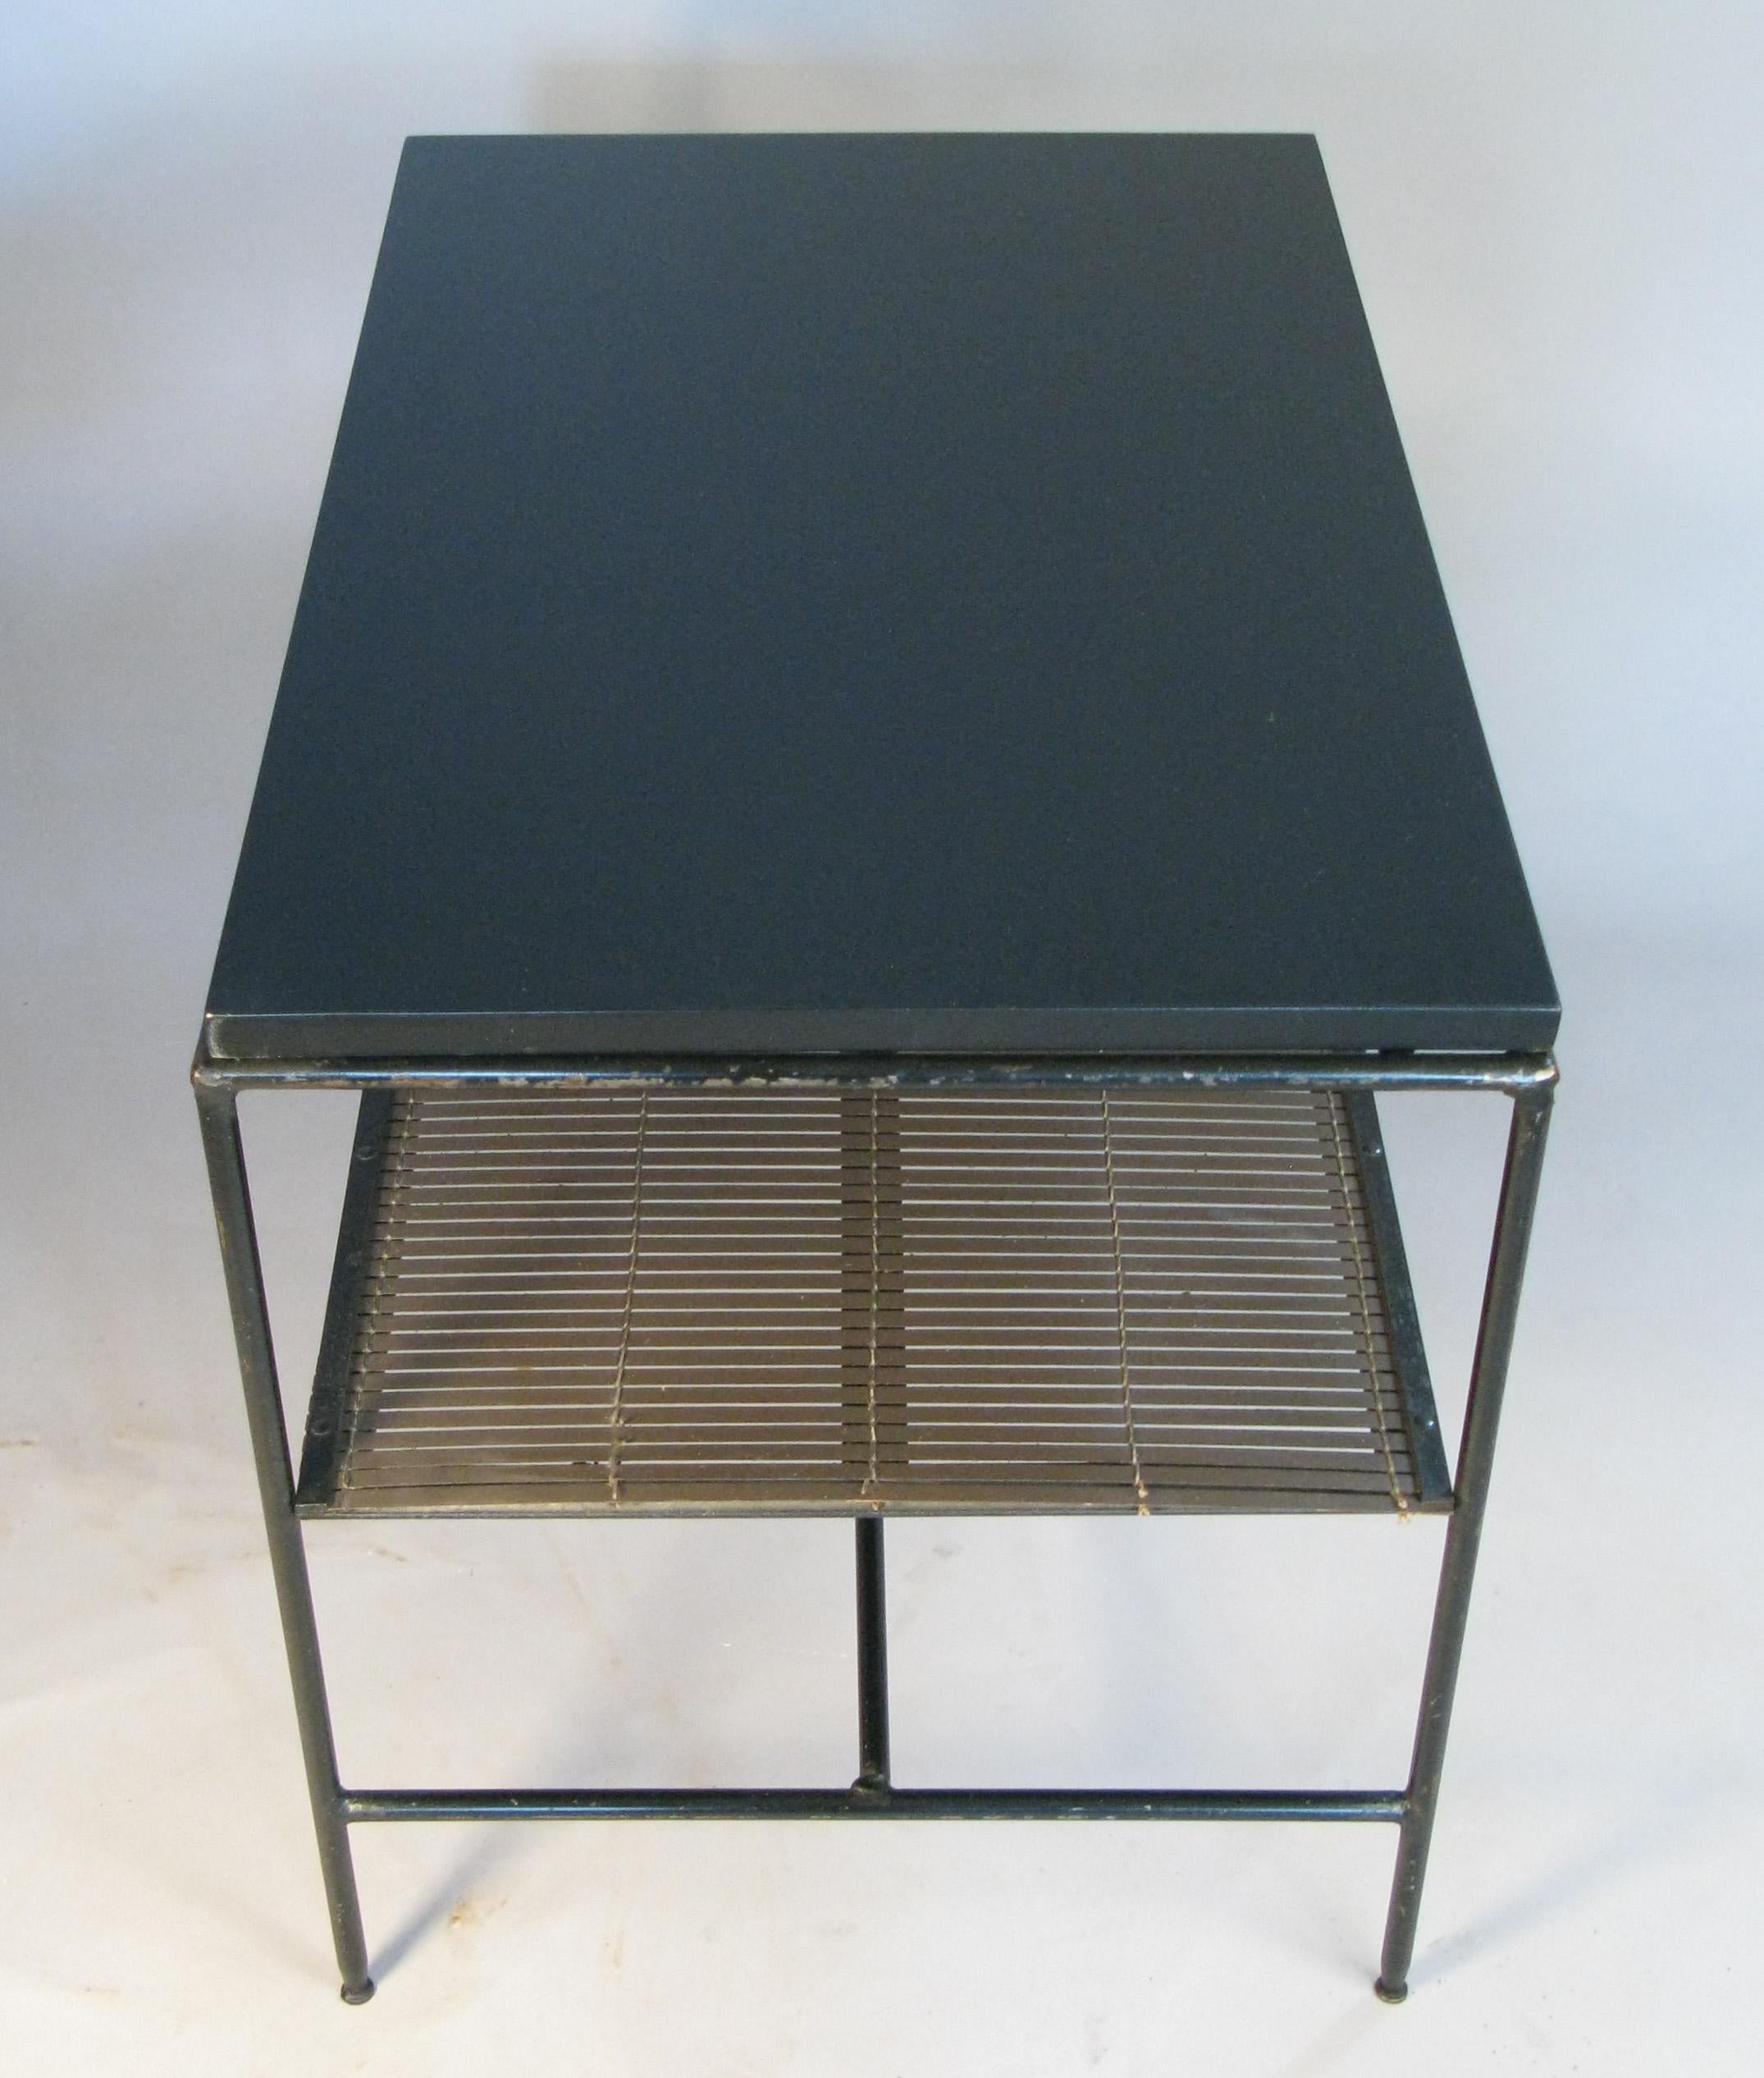 A pair of 1950s tables or nightstands by Paul McCobb, from the Planner Group series for Winchendon, with wrought iron frames, ebonized birch tops, and woven rattan mat lower shelves in dark brown. Tops and rattan shelves have been refinished. Frames